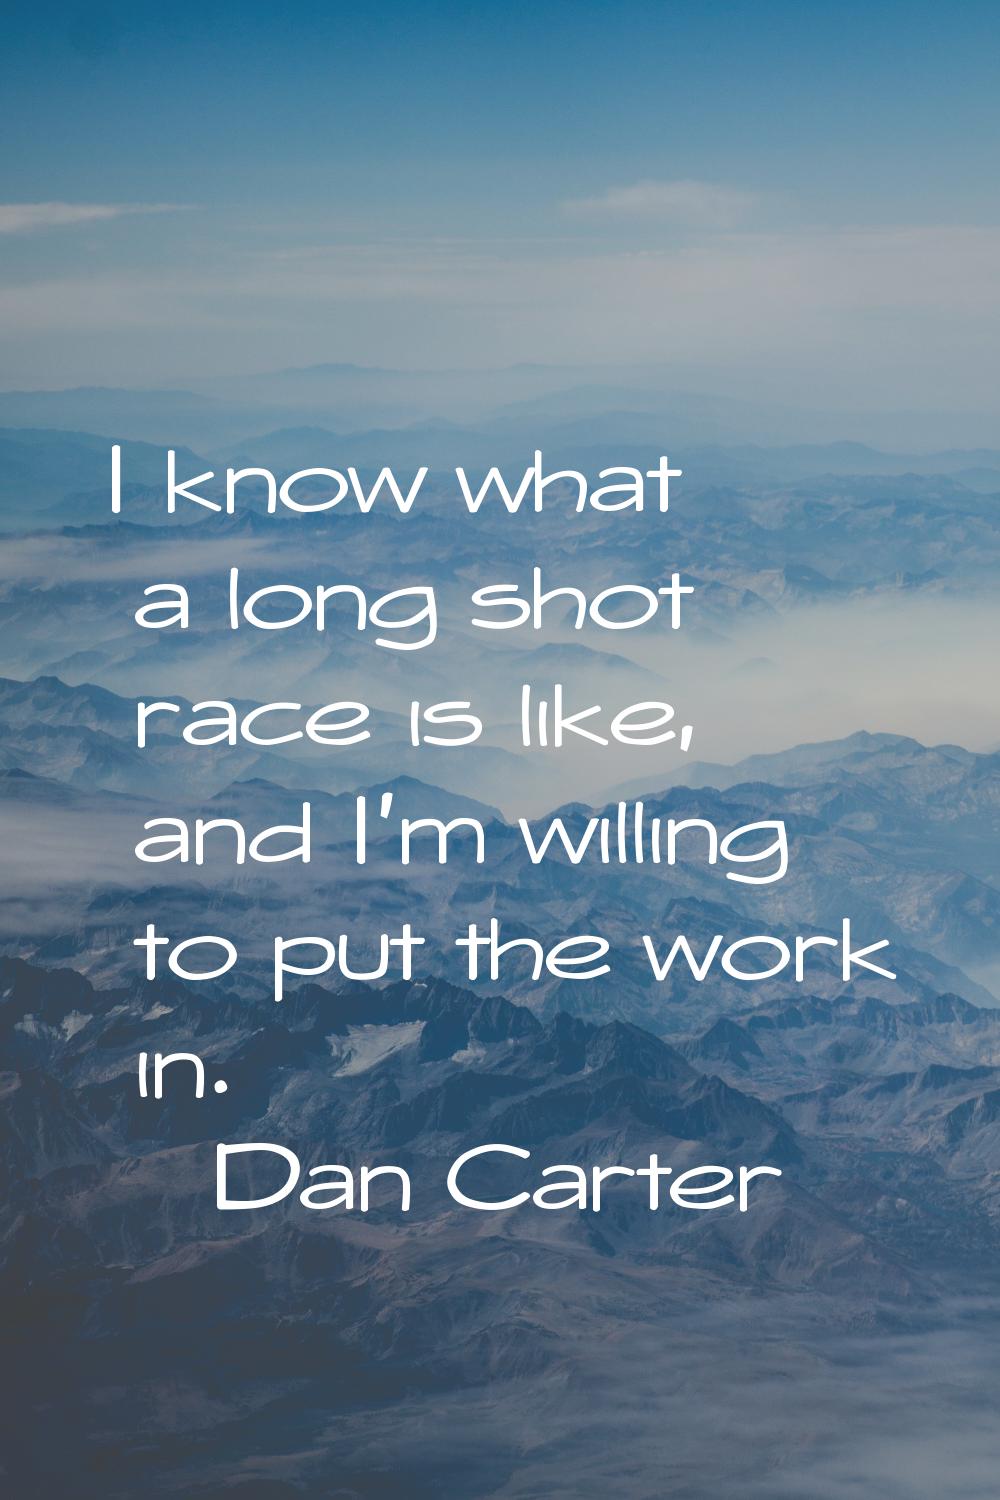 I know what a long shot race is like, and I'm willing to put the work in.